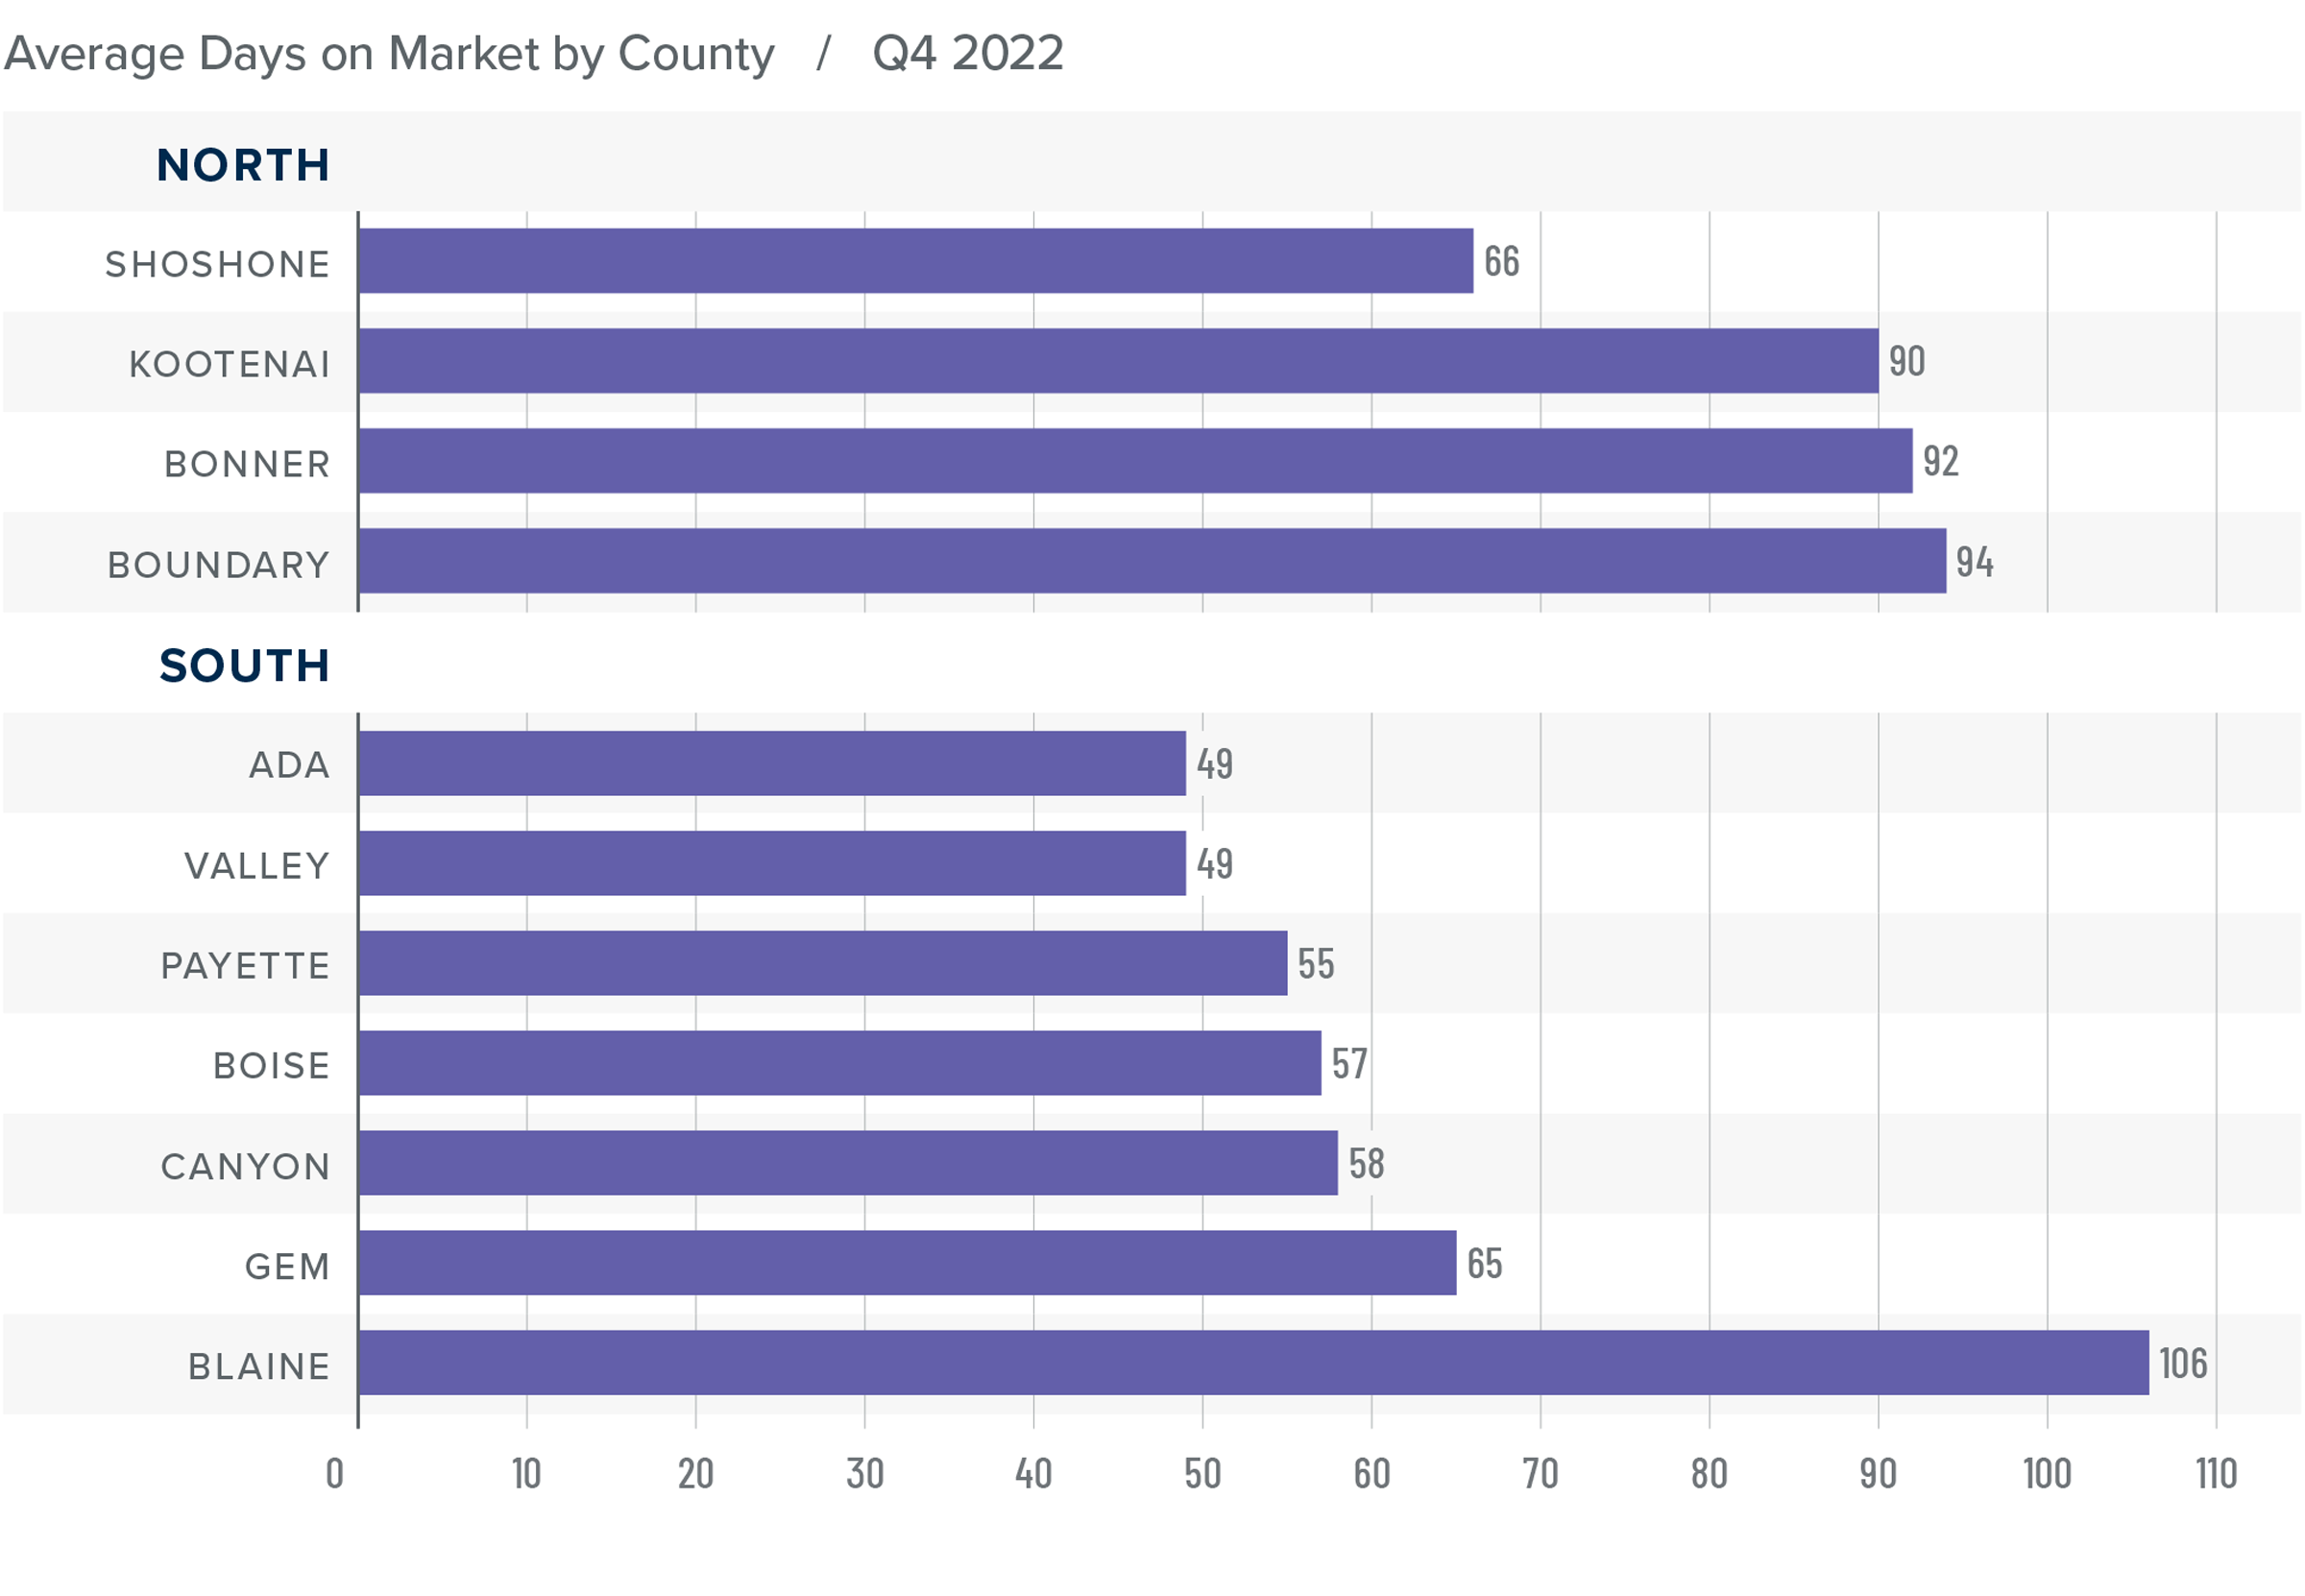 A bar graph showing the average days on market for homes in various counties in North and South Idaho for Q4 2022. In North Idaho, Shoshone County has the lowest DOM at 66, followed by Kootenai at 90, Bonner at 92, and Boundary at 94. In South Idaho, it's Ada and Valley at 49, Payette at 55, Boise at 57, Canyon at 58, Gem at 65, and Blaine at 106.